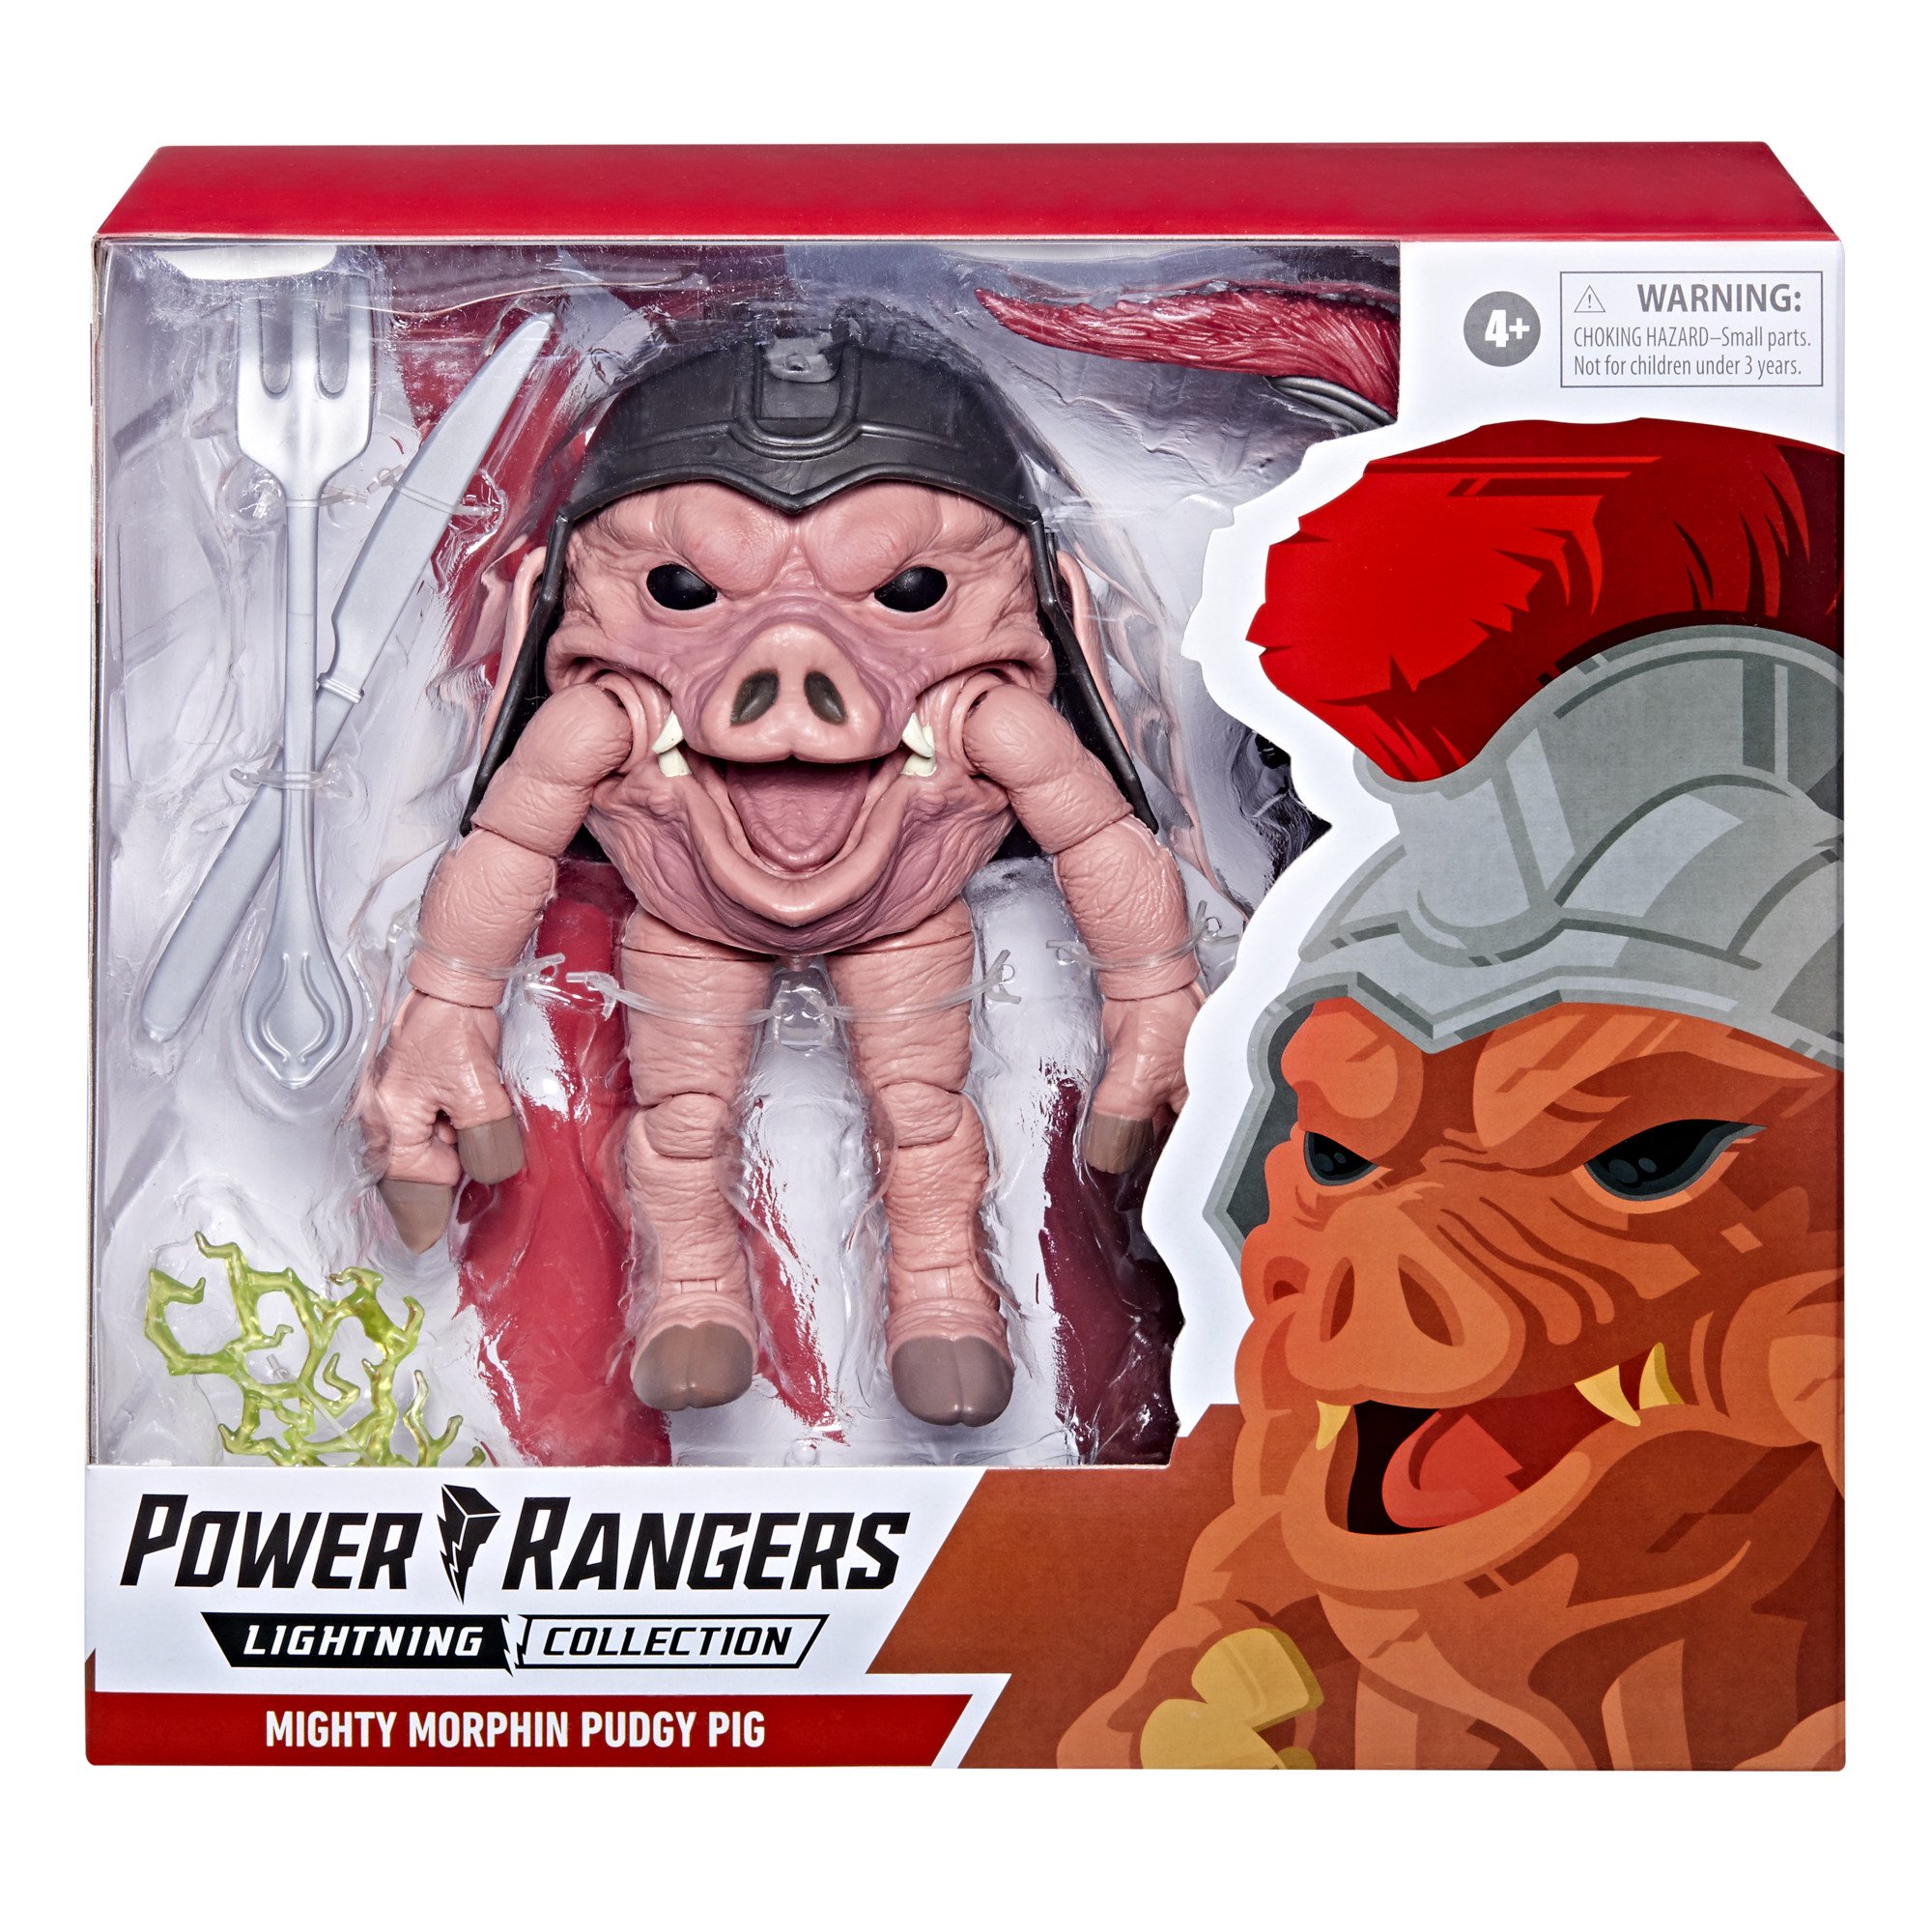 Power Rangers Lightning Collection Mighty Morphin 6" Pudgy Pig Action Figure